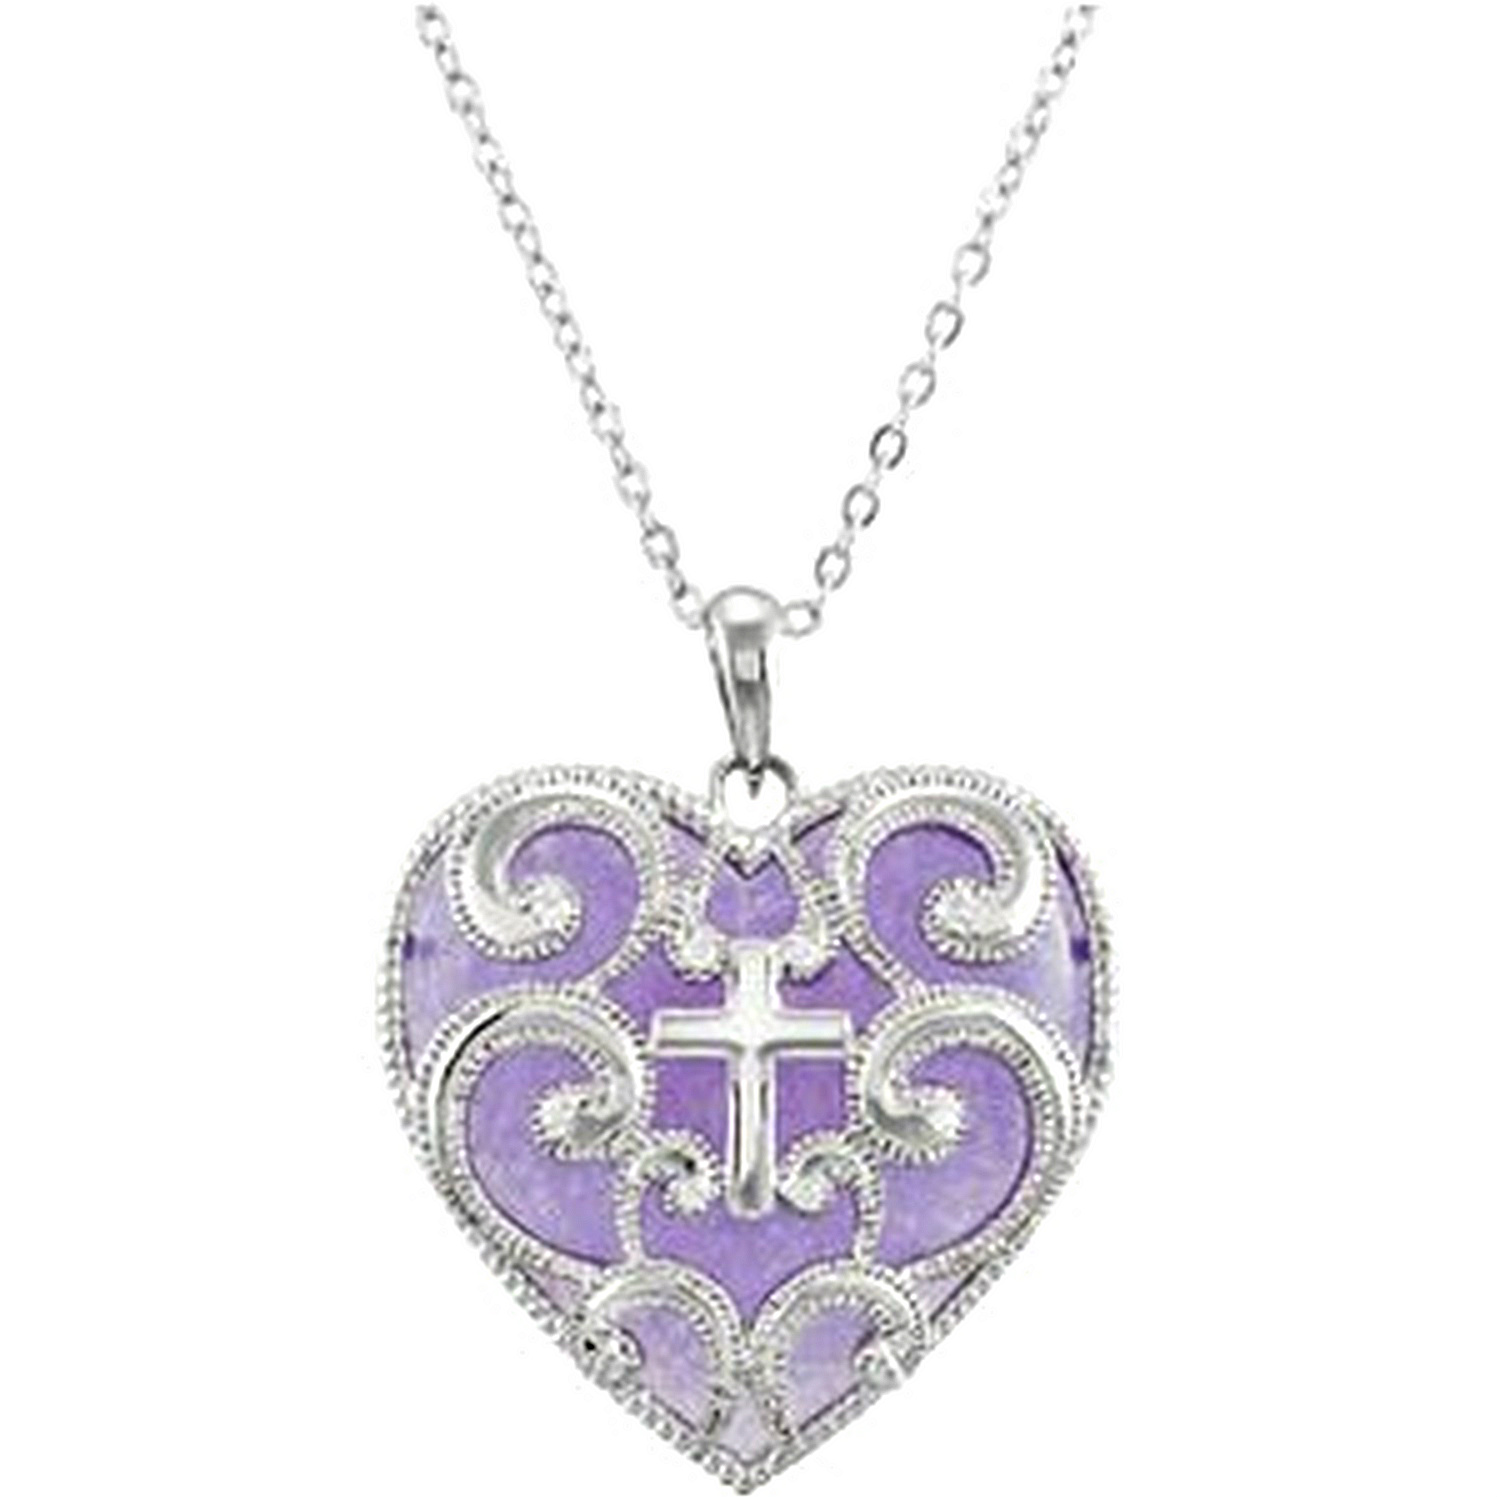 Purple Heart 'Daughter to the King' Rhodium Plated Sterling Silver Necklace.